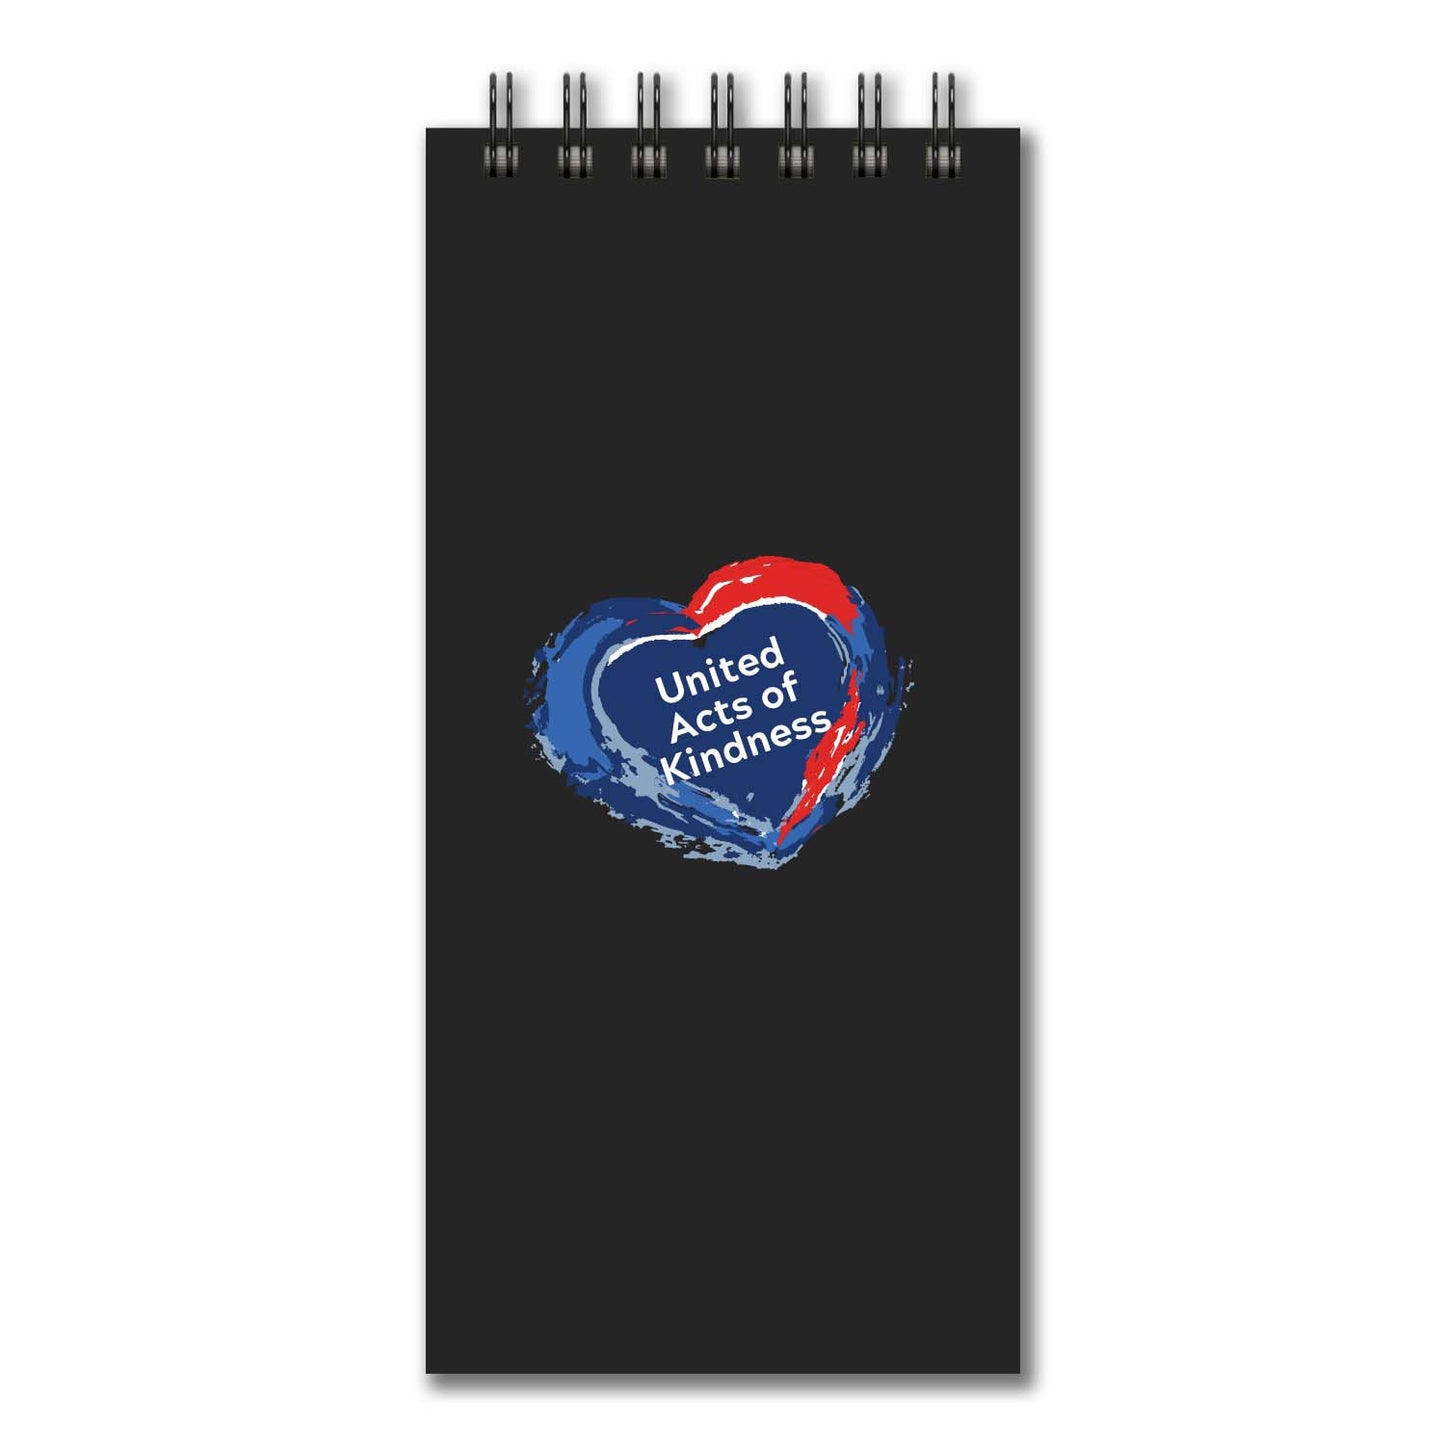 United Acts of Kindness - Notepad (Pack of 4)